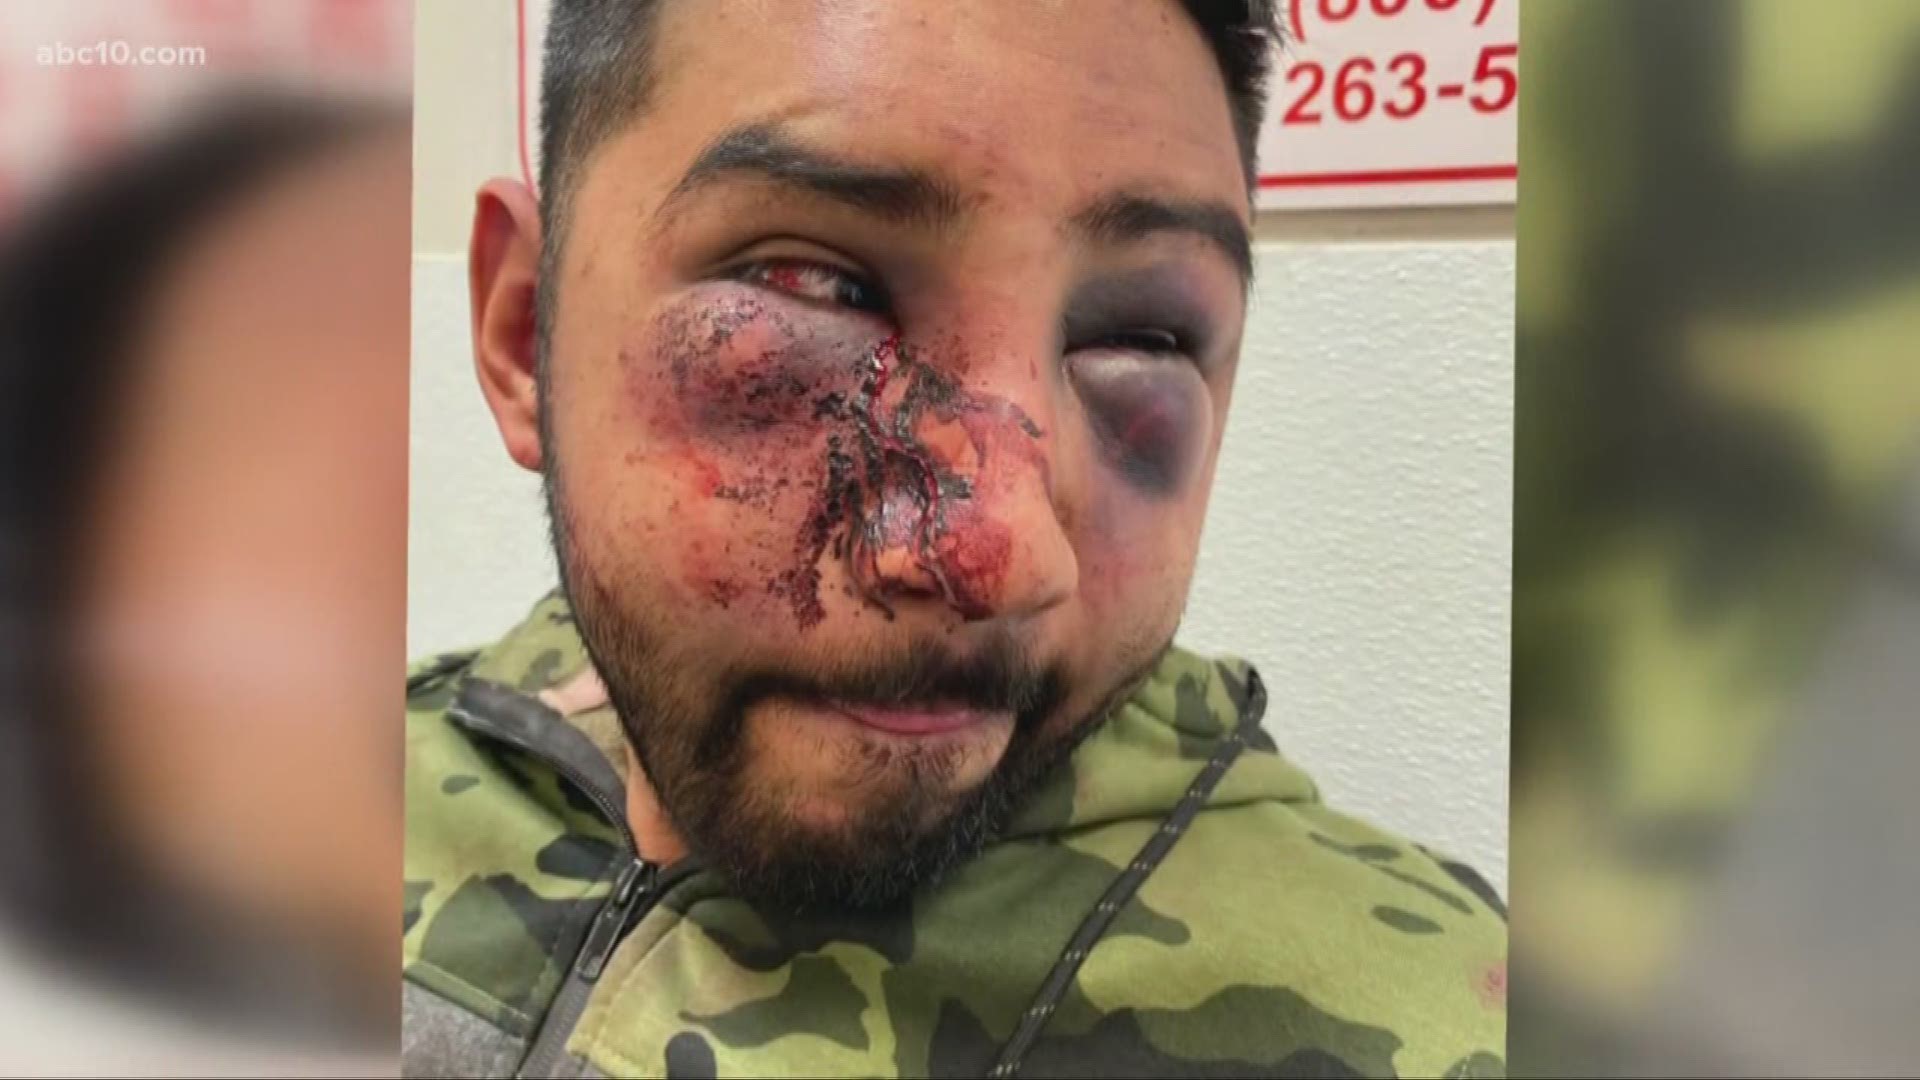 Supporters want an outside investigating into the beating of 29-year-old Jacob Servin. They also want to know the names of the officers involved.